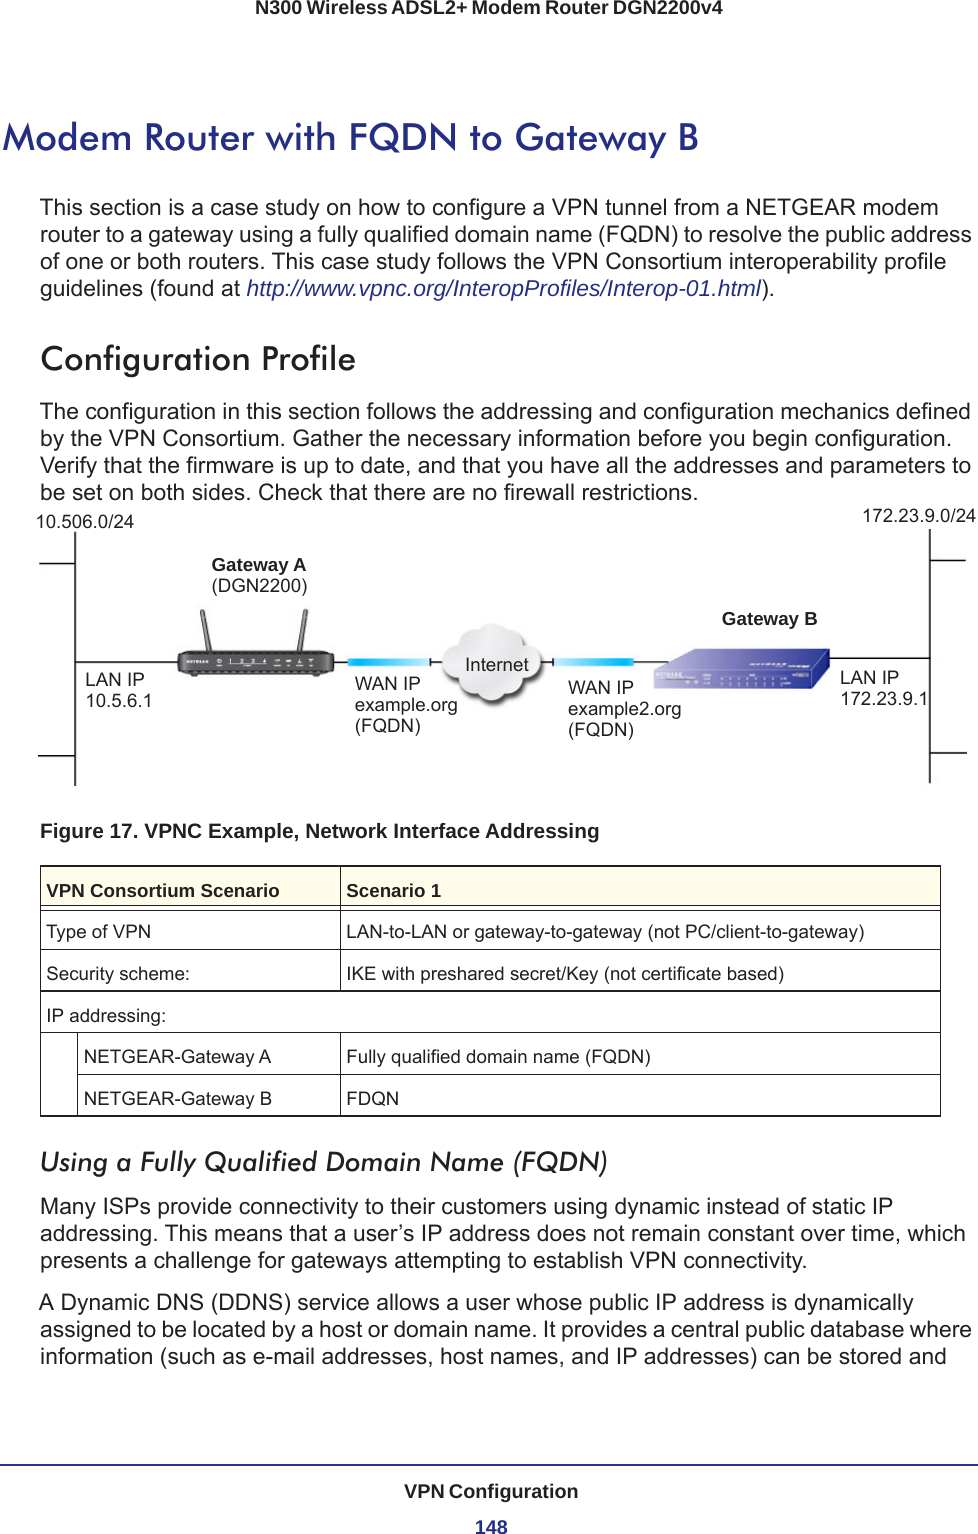 VPN Configuration148N300 Wireless ADSL2+ Modem Router DGN2200v4Modem Router with FQDN to Gateway BThis section is a case study on how to configure a VPN tunnel from a NETGEAR modem router to a gateway using a fully qualified domain name (FQDN) to resolve the public address of one or both routers. This case study follows the VPN Consortium interoperability profile guidelines (found at http://www.vpnc.org/InteropProfiles/Interop-01.html). Configuration ProfileThe configuration in this section follows the addressing and configuration mechanics defined by the VPN Consortium. Gather the necessary information before you begin configuration. Verify that the firmware is up to date, and that you have all the addresses and parameters to be set on both sides. Check that there are no firewall restrictions.Gateway AWAN IP Internet10.506.0/24(DGN2200)LAN IP10.5.6.1 example.org WAN IPexample2.orgGateway BLAN IP172.23.9.1172.23.9.0/24(FQDN) (FQDN)Figure 17. VPNC Example, Network Interface AddressingVPN Consortium Scenario Scenario 1Type of VPN  LAN-to-LAN or gateway-to-gateway (not PC/client-to-gateway)Security scheme: IKE with preshared secret/Key (not certificate based)IP addressing:NETGEAR-Gateway A Fully qualified domain name (FQDN)NETGEAR-Gateway B FDQNUsing a Fully Qualified Domain Name (FQDN)Many ISPs provide connectivity to their customers using dynamic instead of static IP addressing. This means that a user’s IP address does not remain constant over time, which presents a challenge for gateways attempting to establish VPN connectivity.A Dynamic DNS (DDNS) service allows a user whose public IP address is dynamically assigned to be located by a host or domain name. It provides a central public database where information (such as e-mail addresses, host names, and IP addresses) can be stored and 